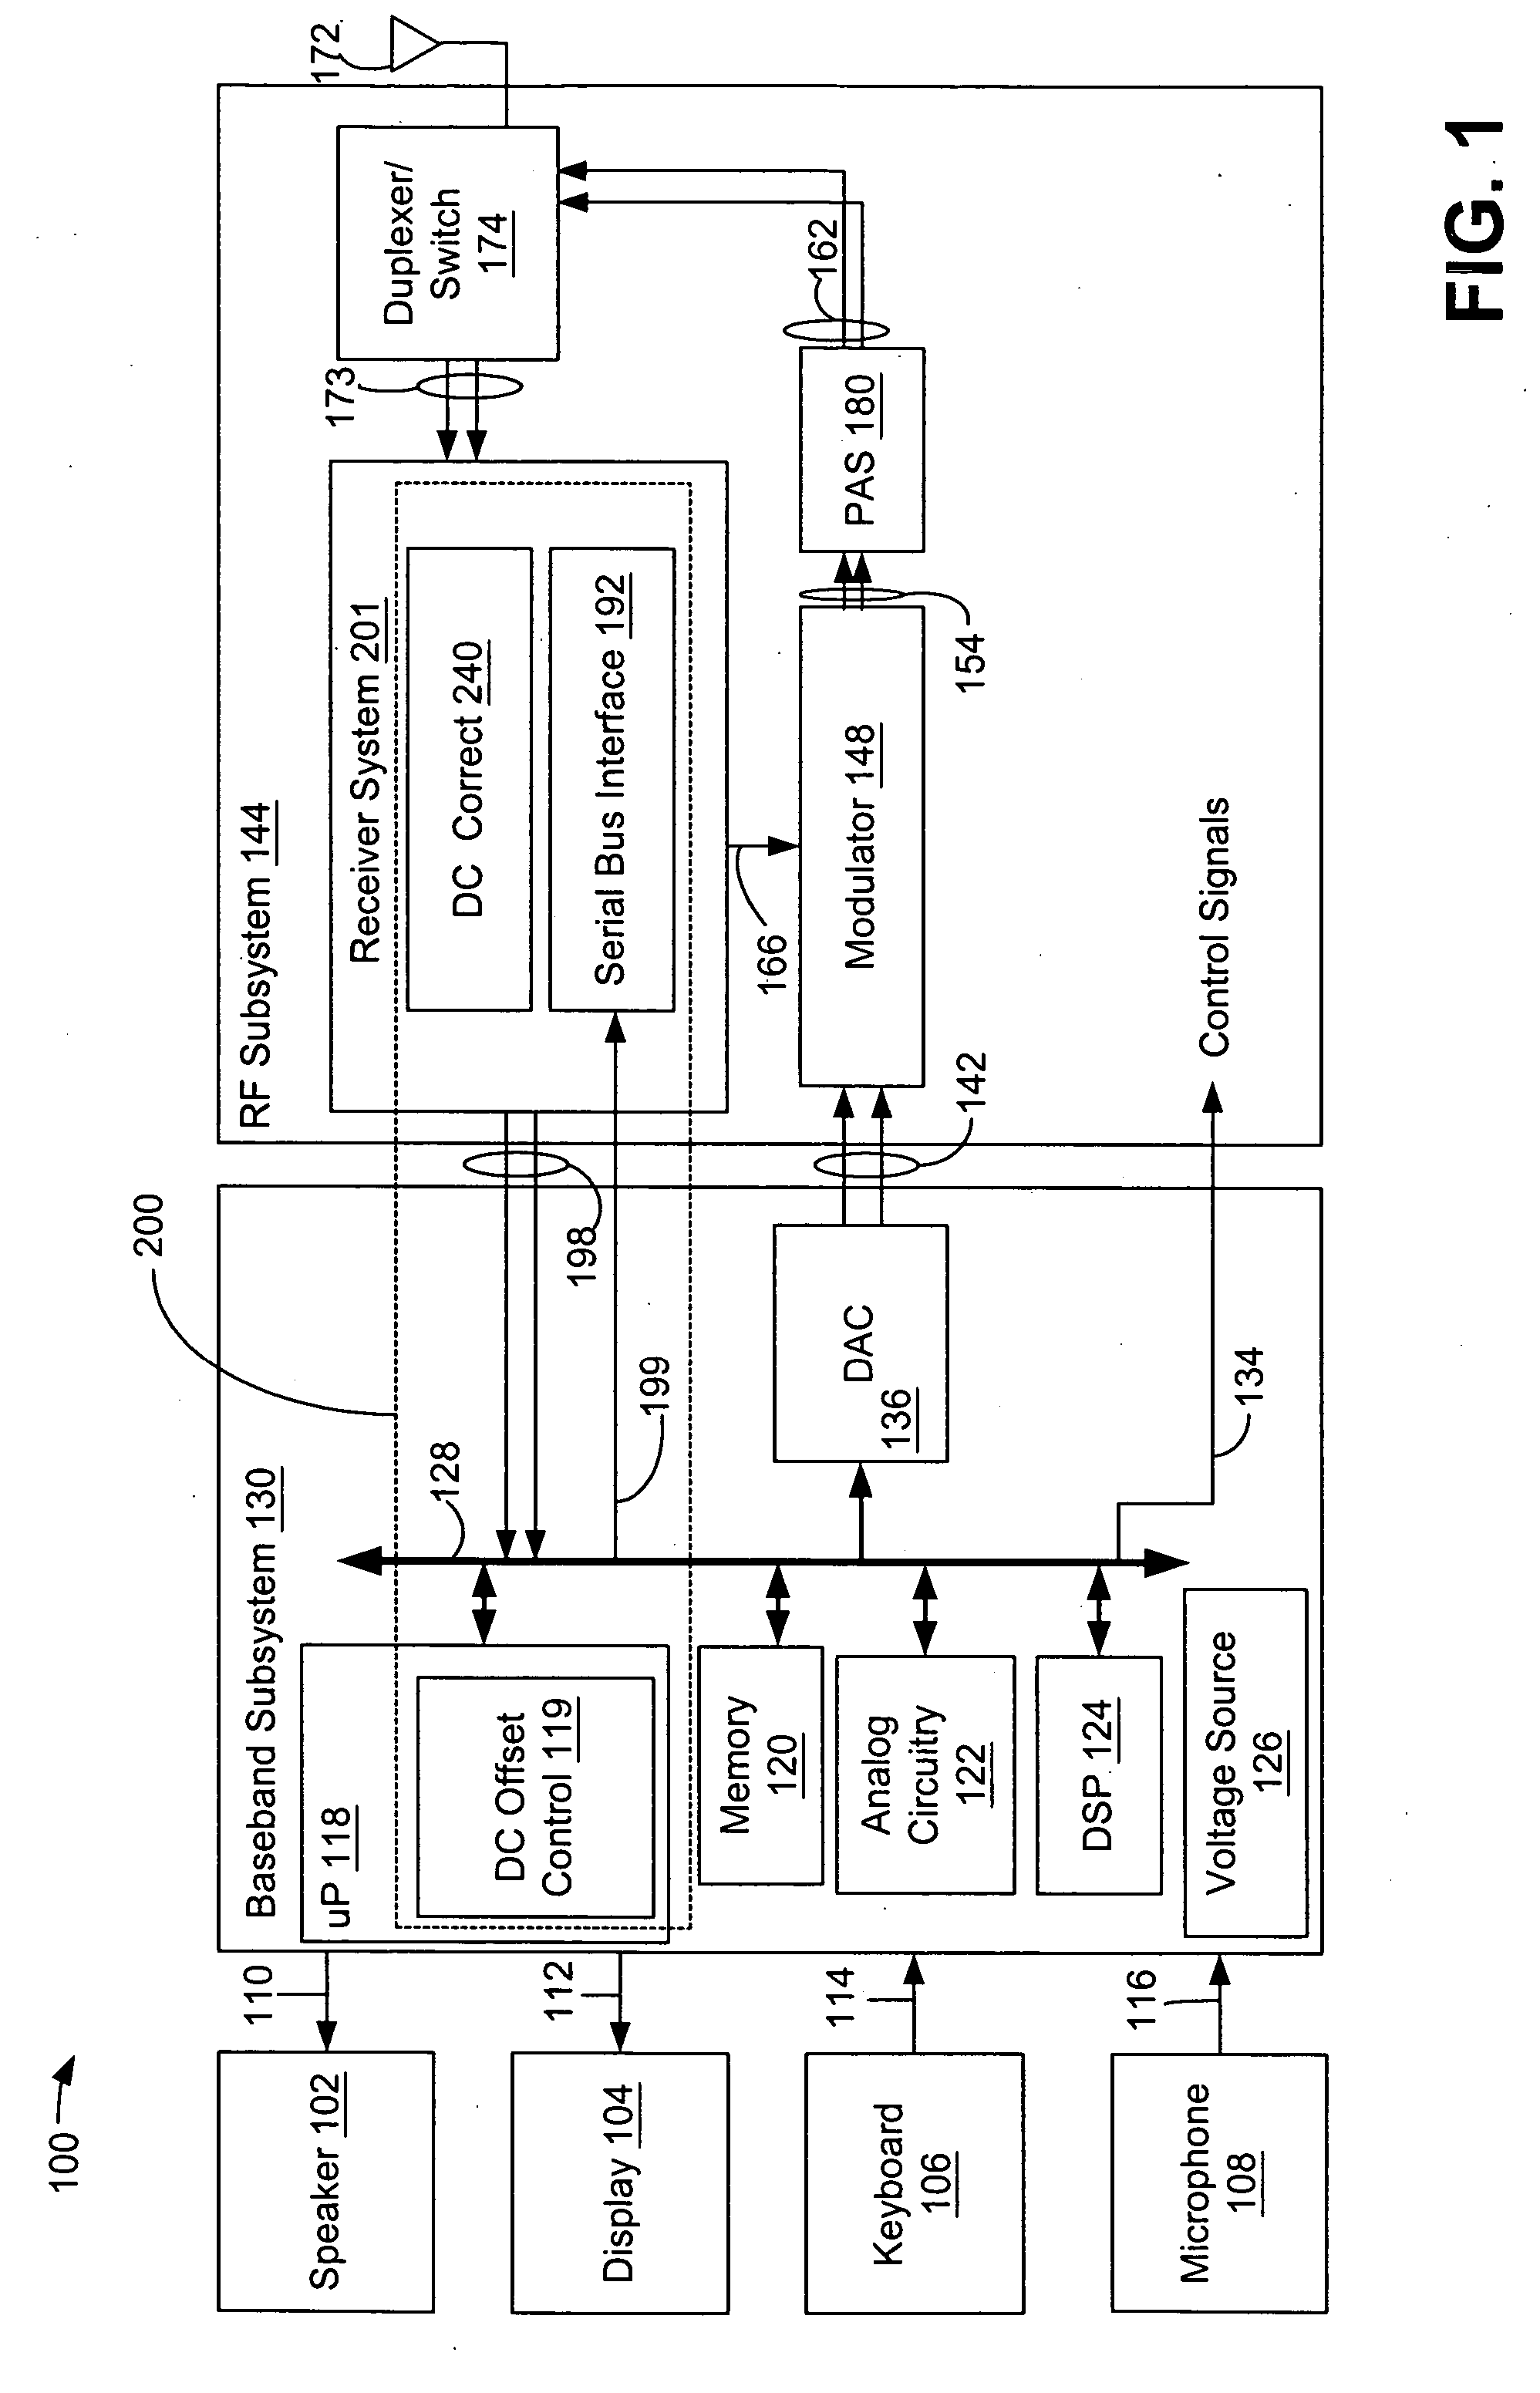 Direct current offset correction systems and methods